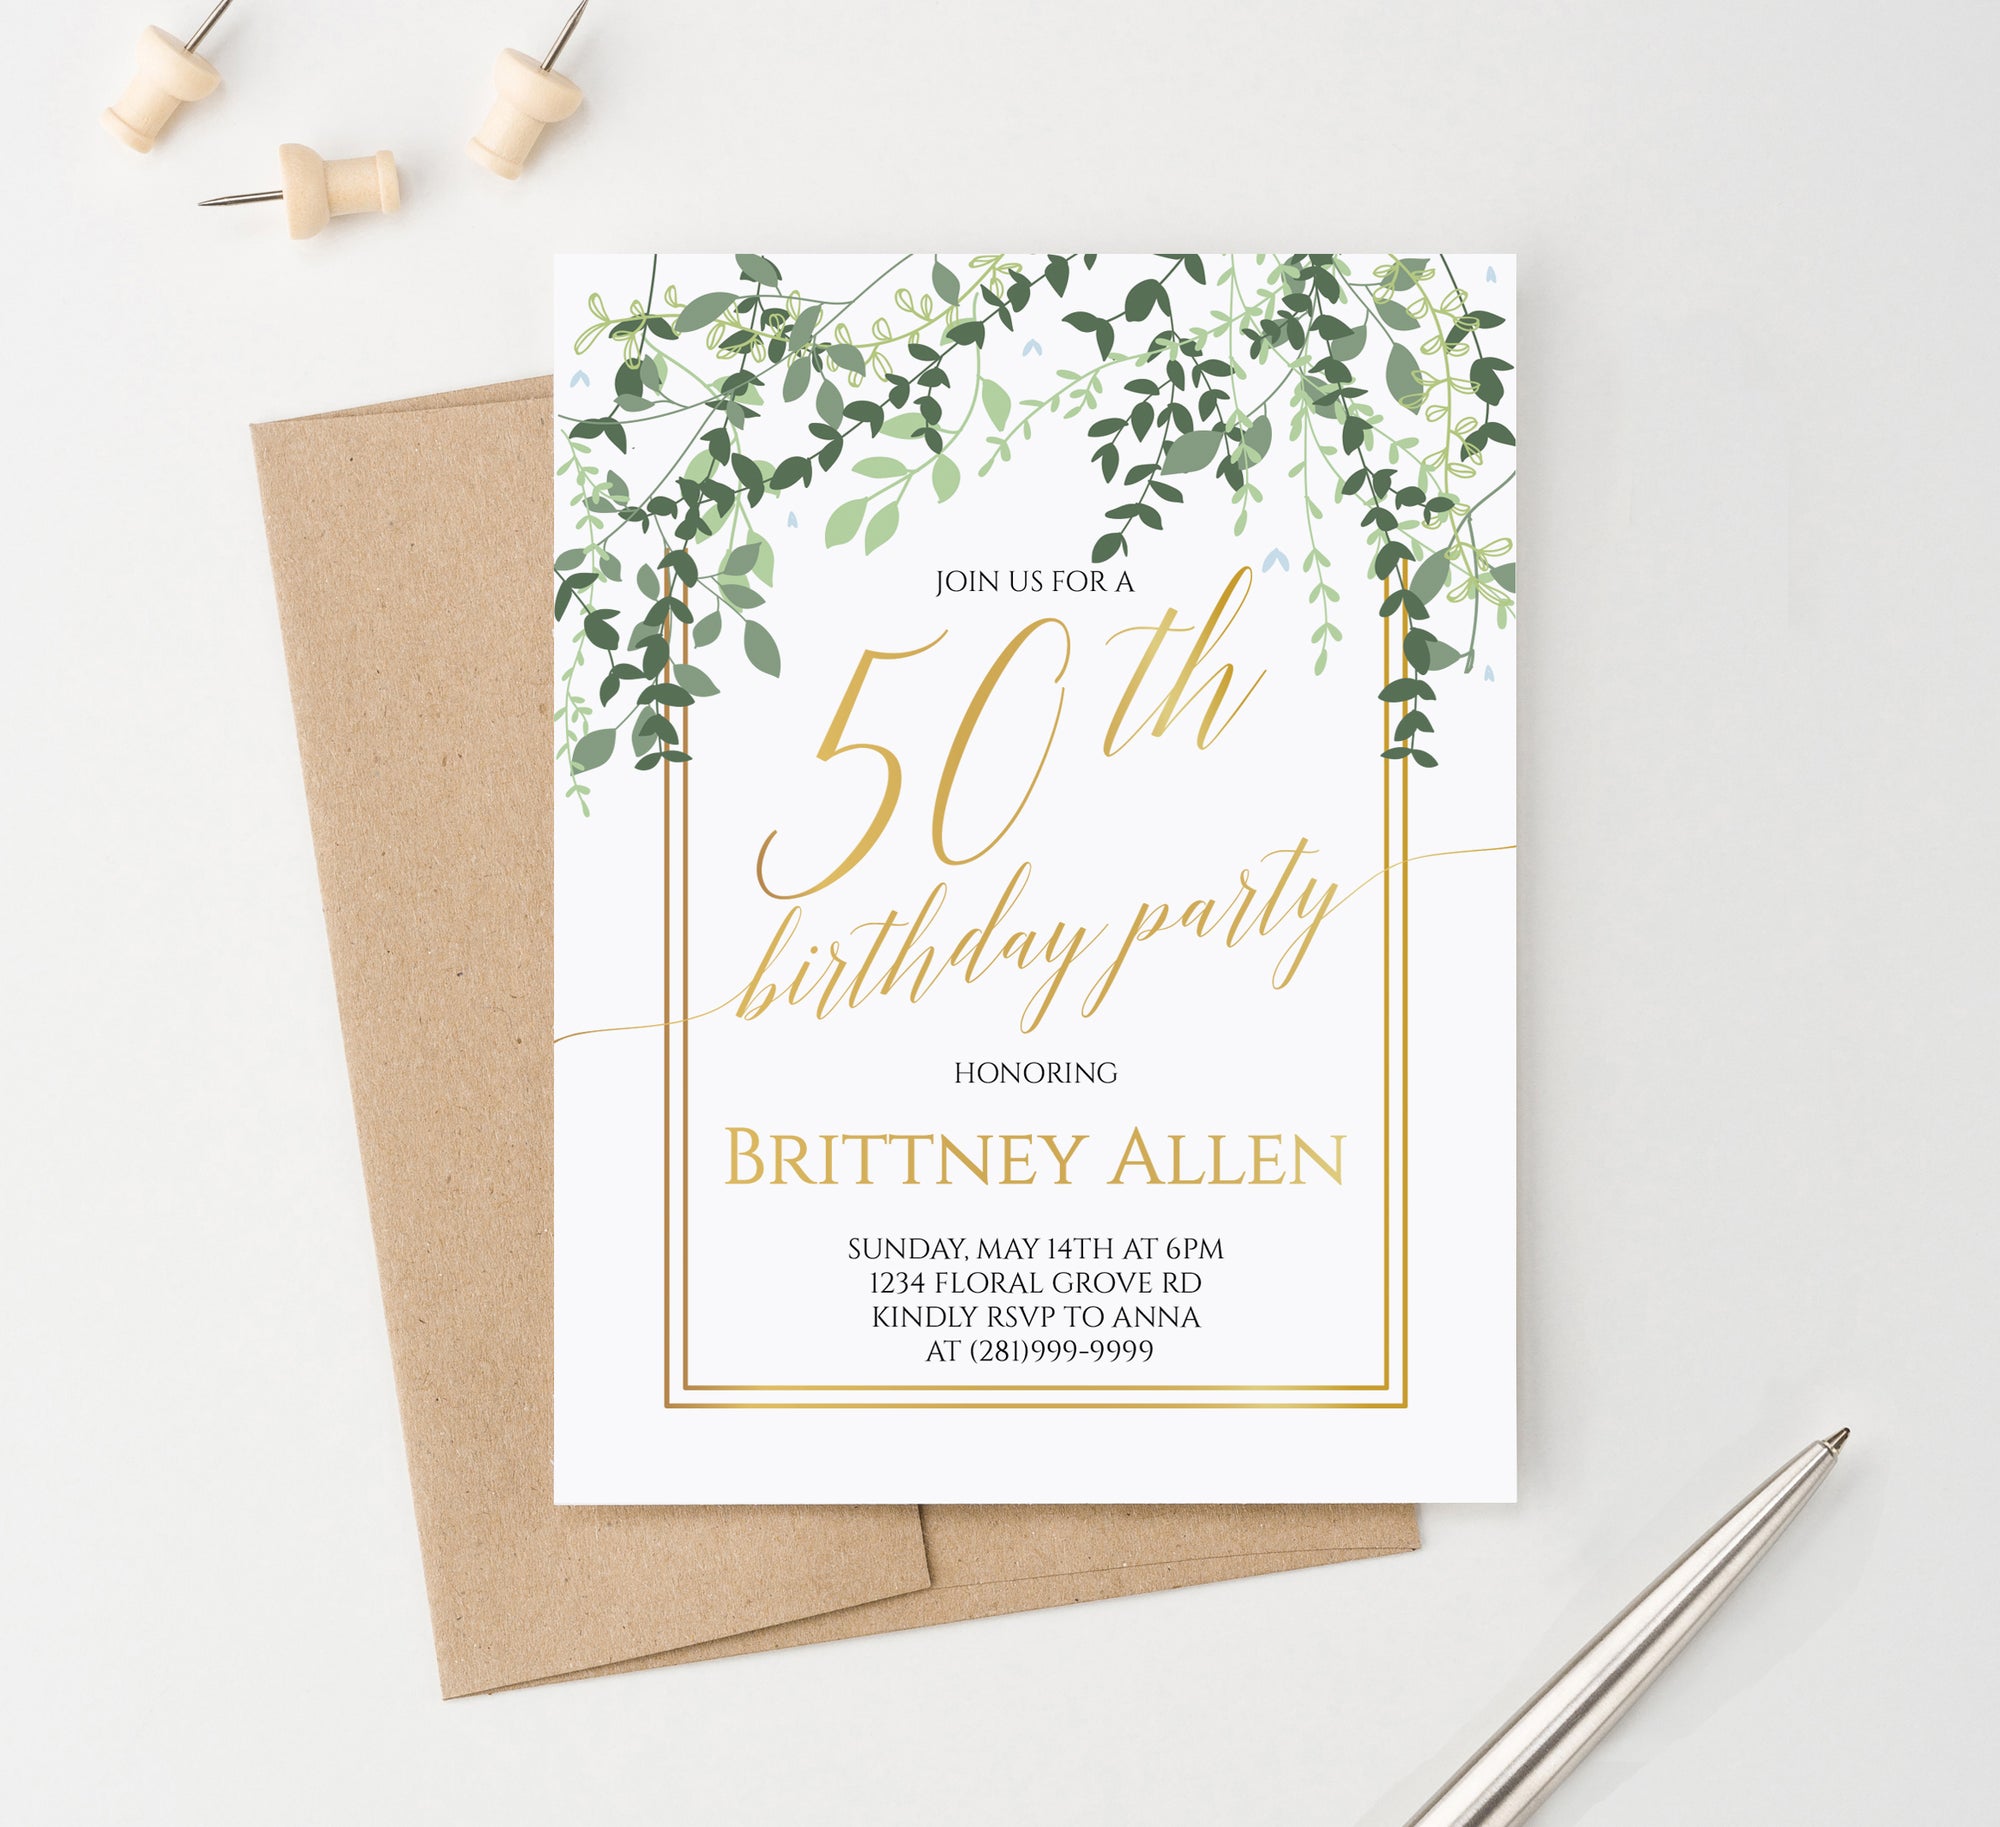 Personalized Greenery 30th Birthday Party Invitations With Gold Frame